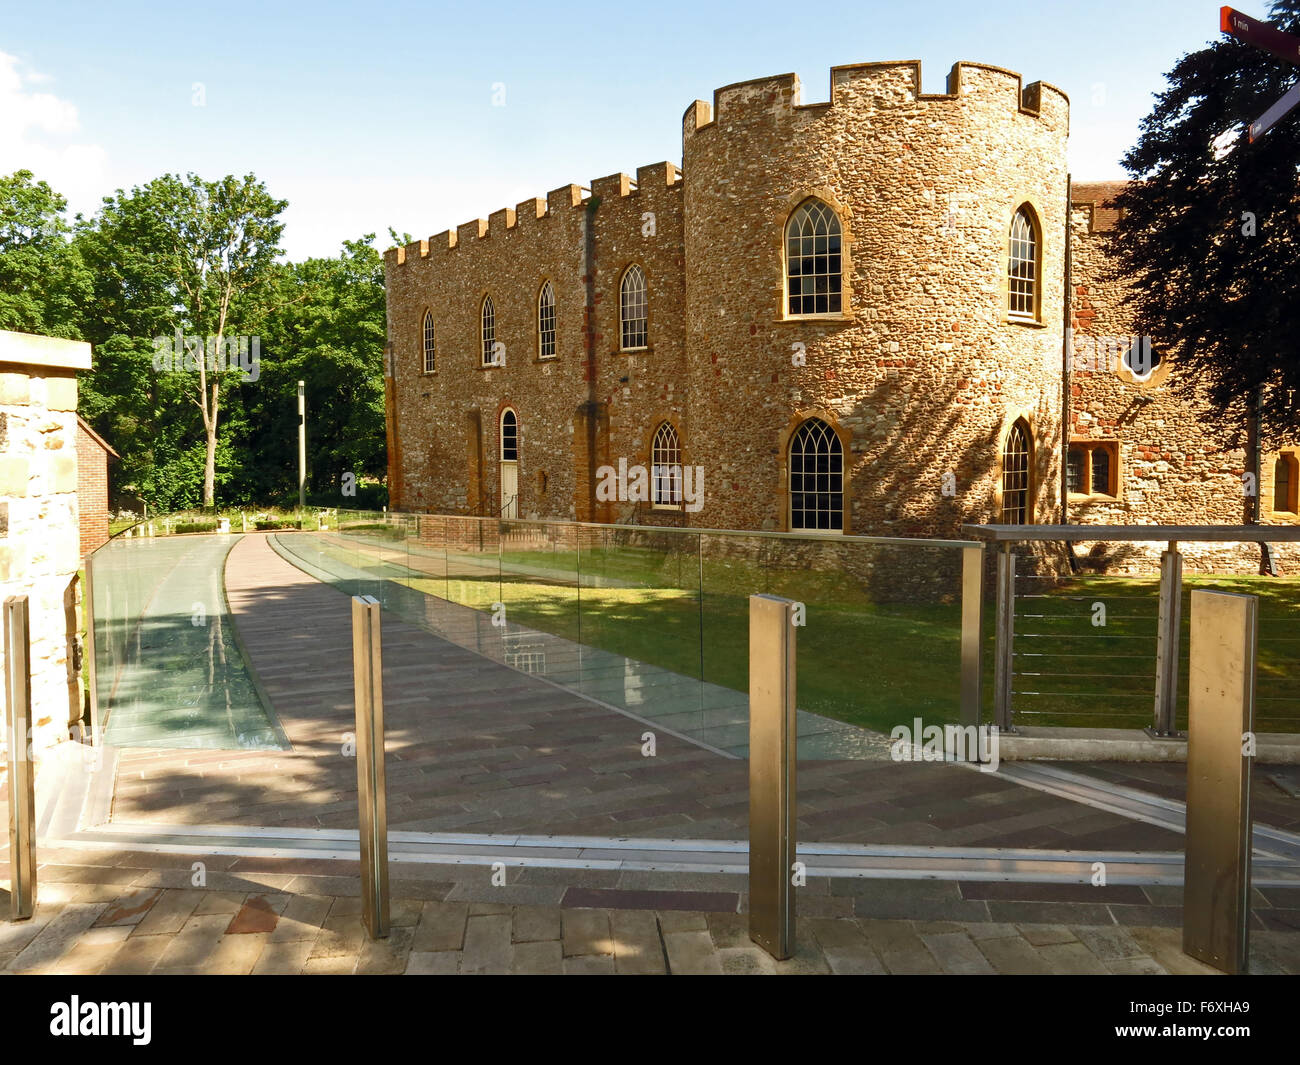 A round tower of Taunton Castle which houses the Somerset County Museum, Taunton, England, UK Stock Photo